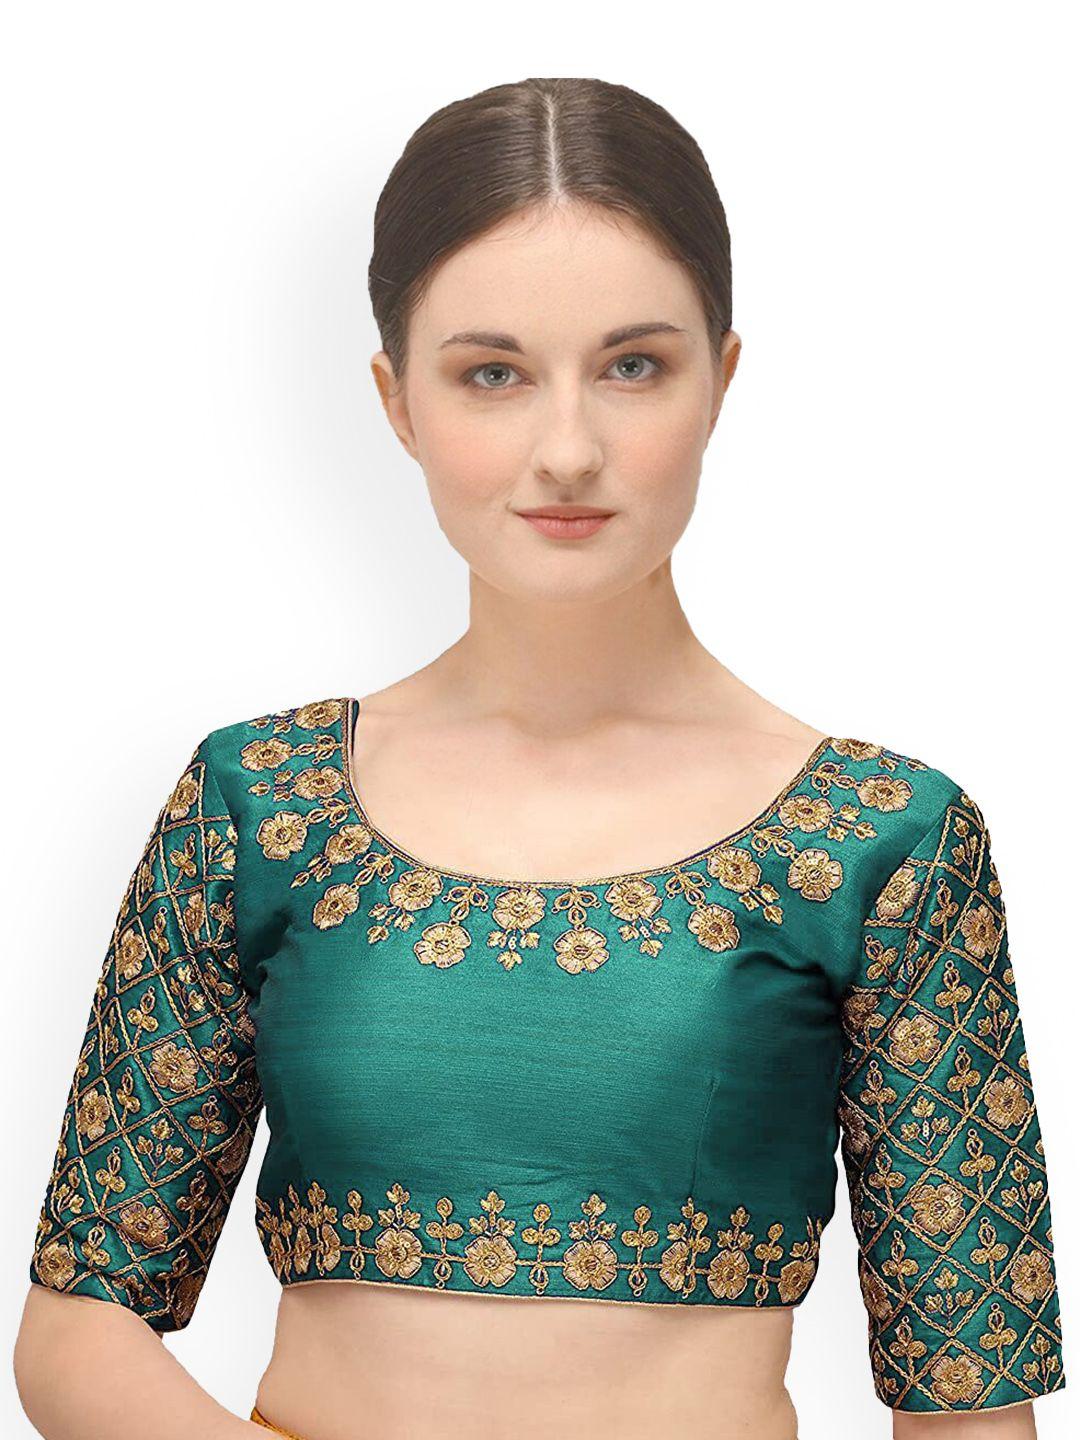 sumaira-tex-teal-green-&-gold-coloured-embroidered-saree-blouse